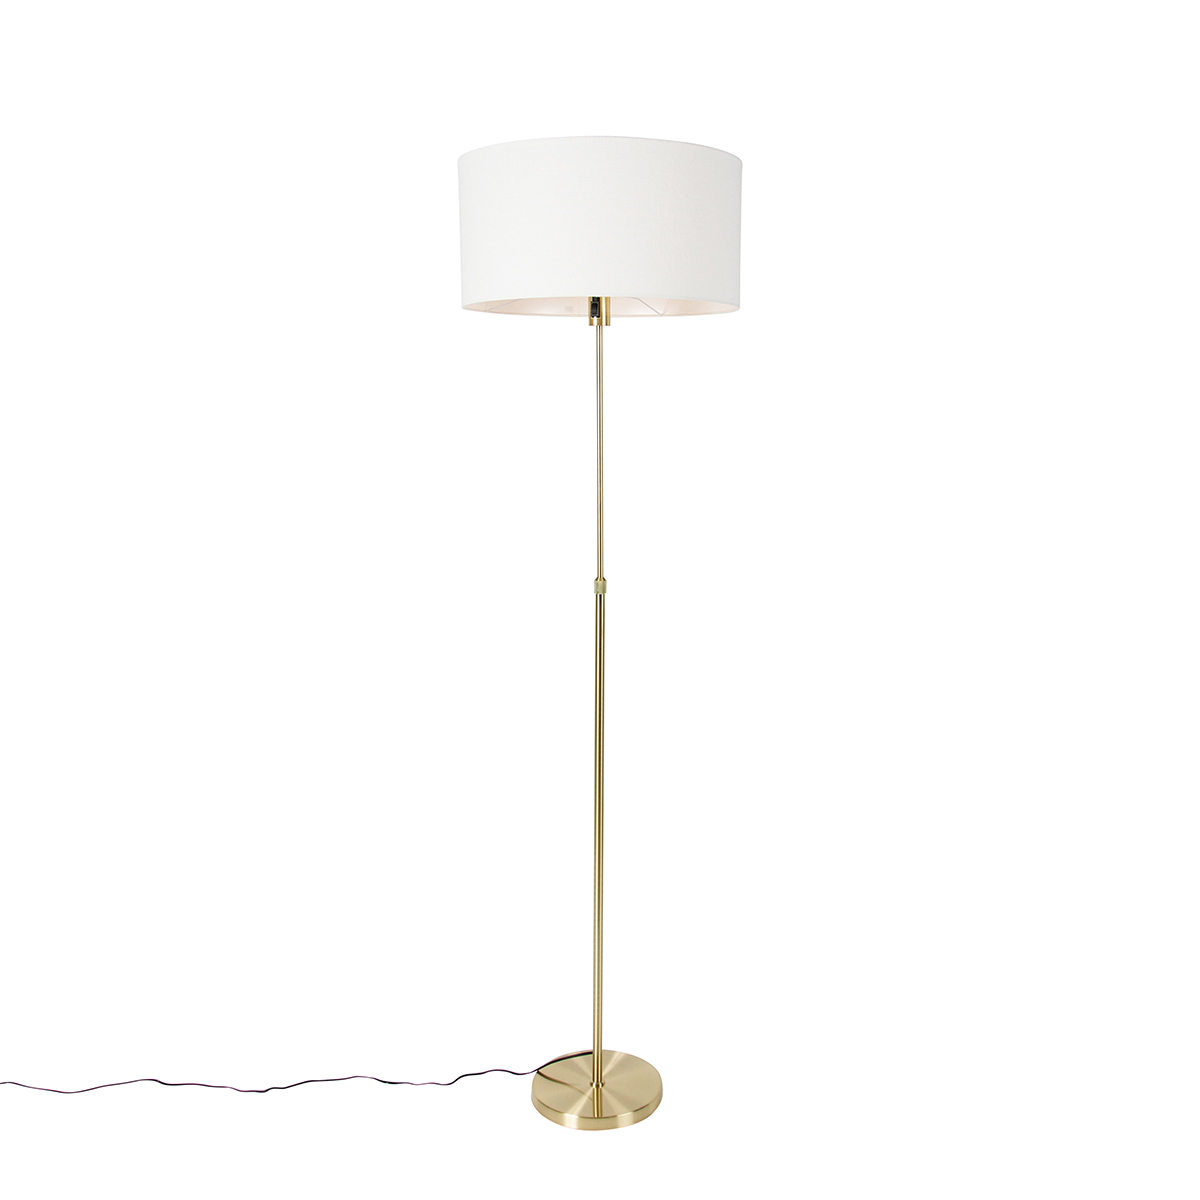 Floor lamp adjustable gold with shade white 50 cm - Parte